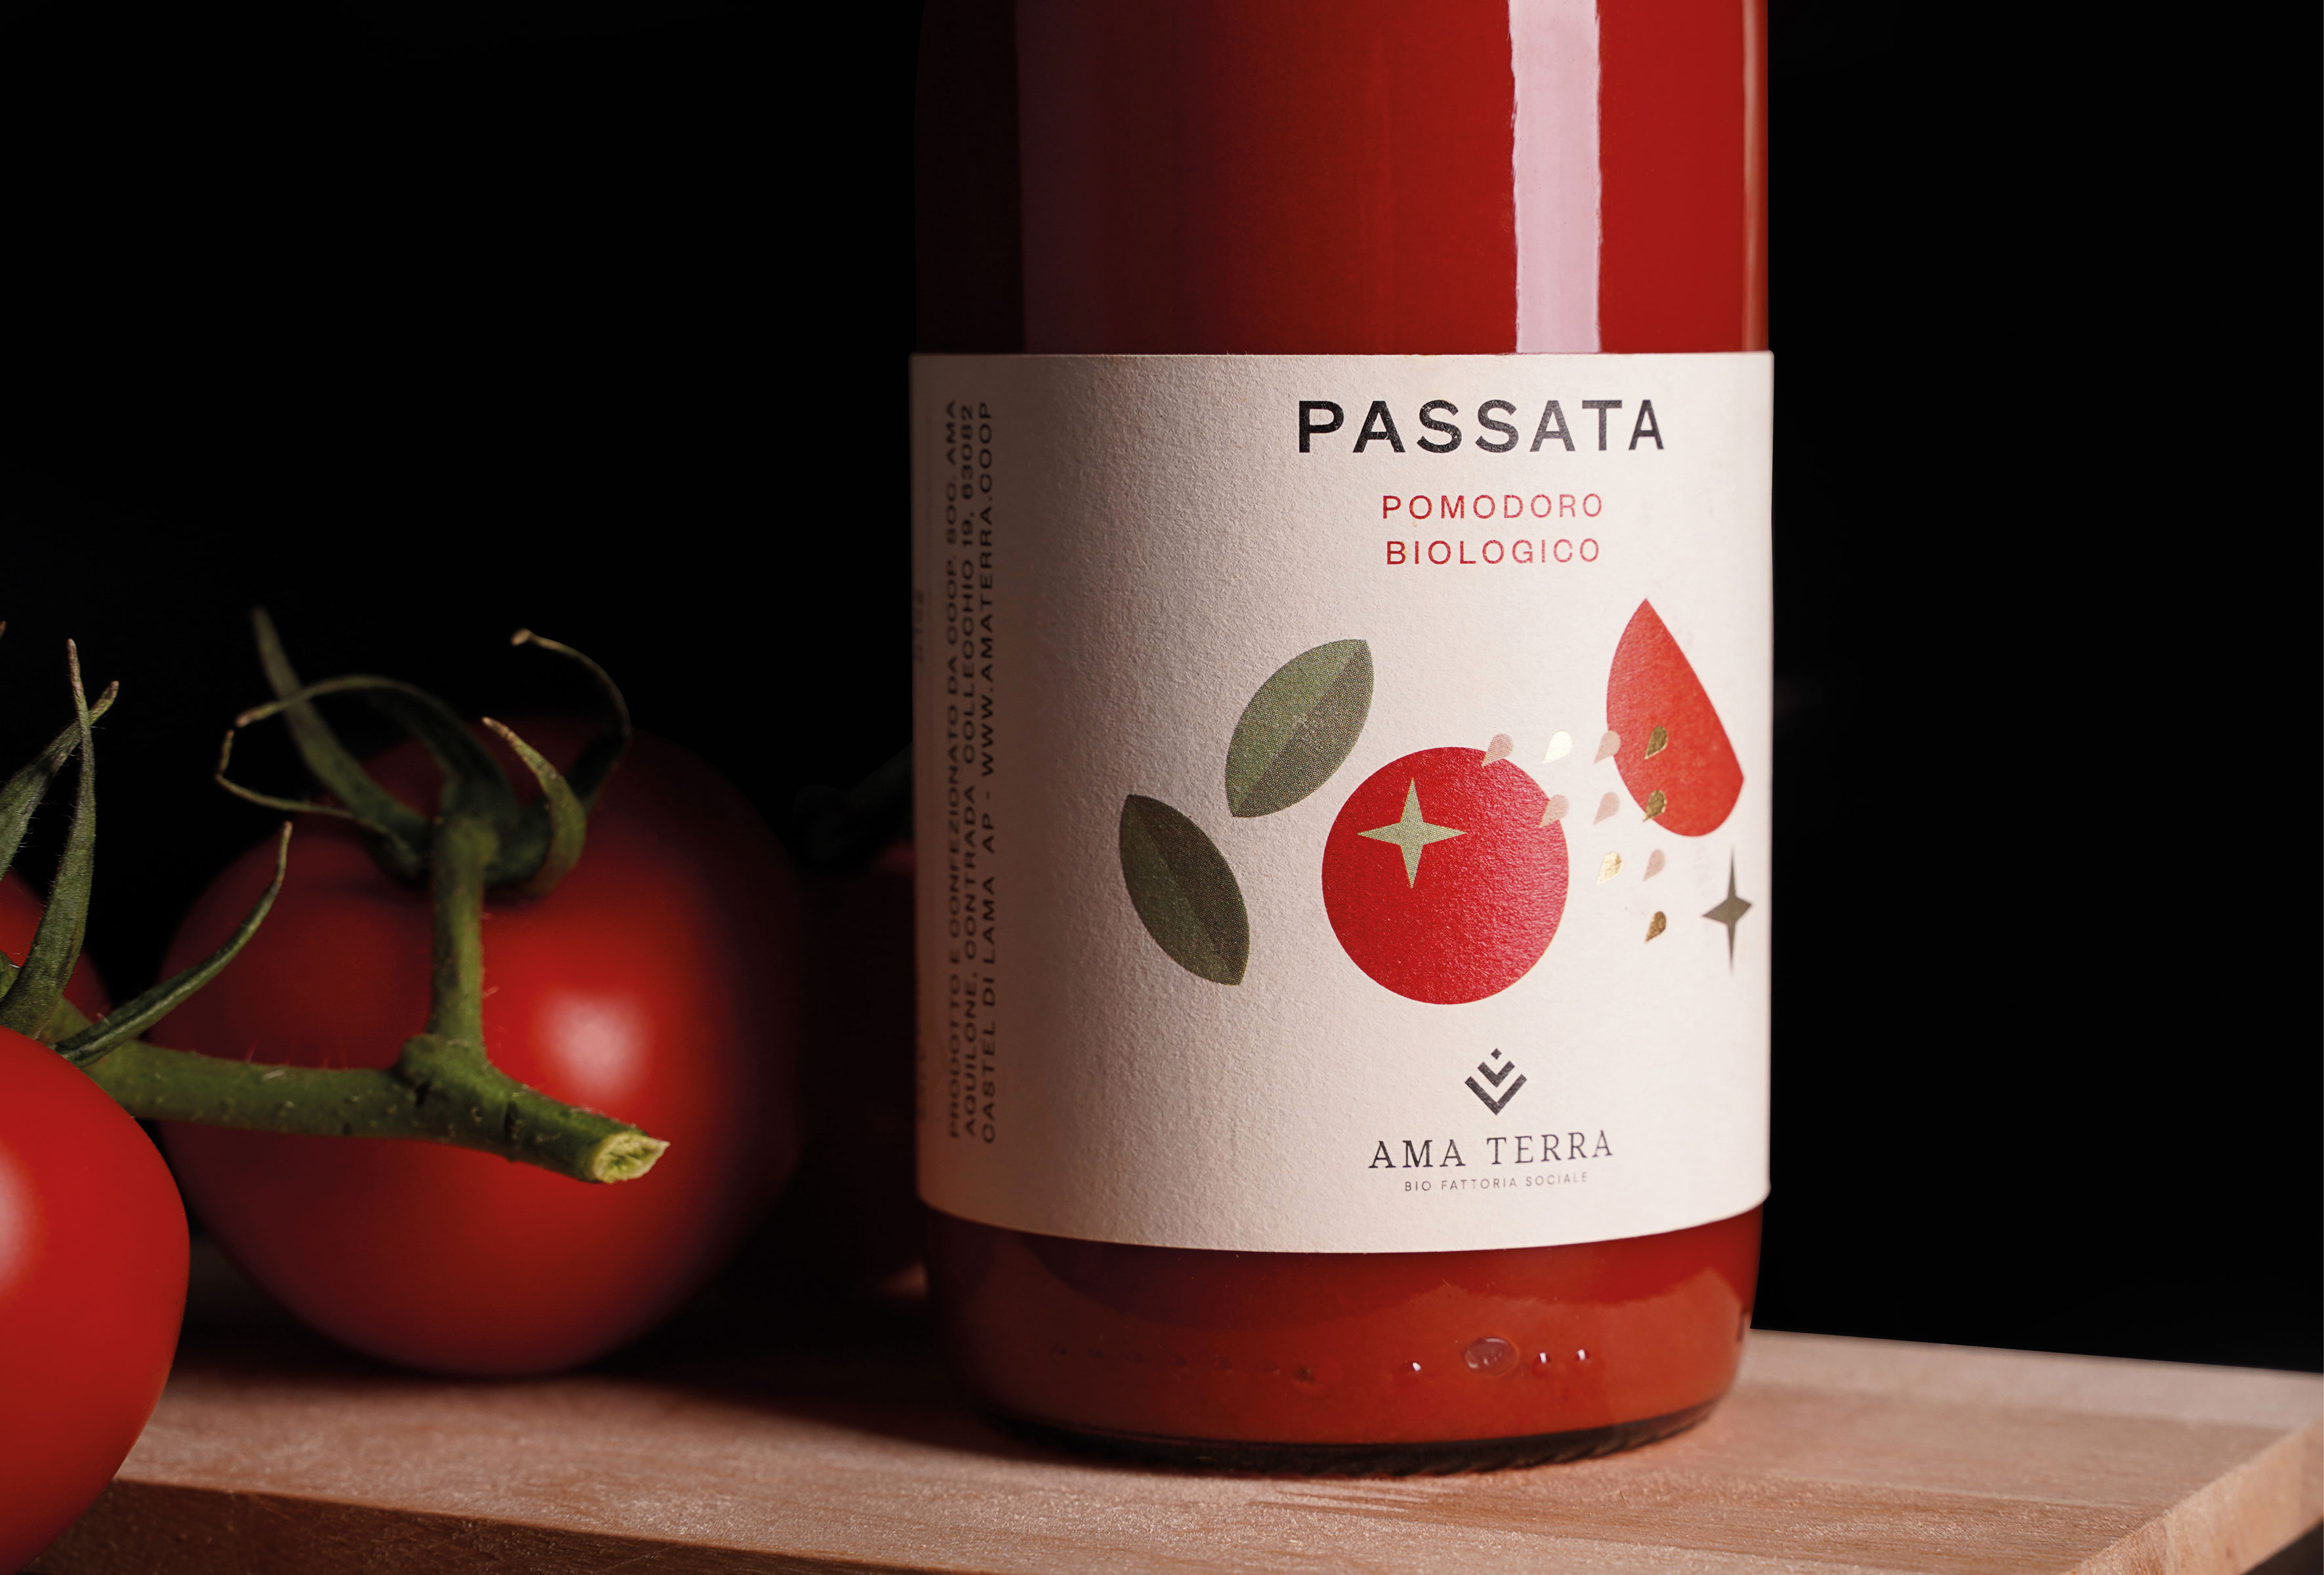 Emmesse Graphic Create Label and Packaging Design for Tomato Ama Terra